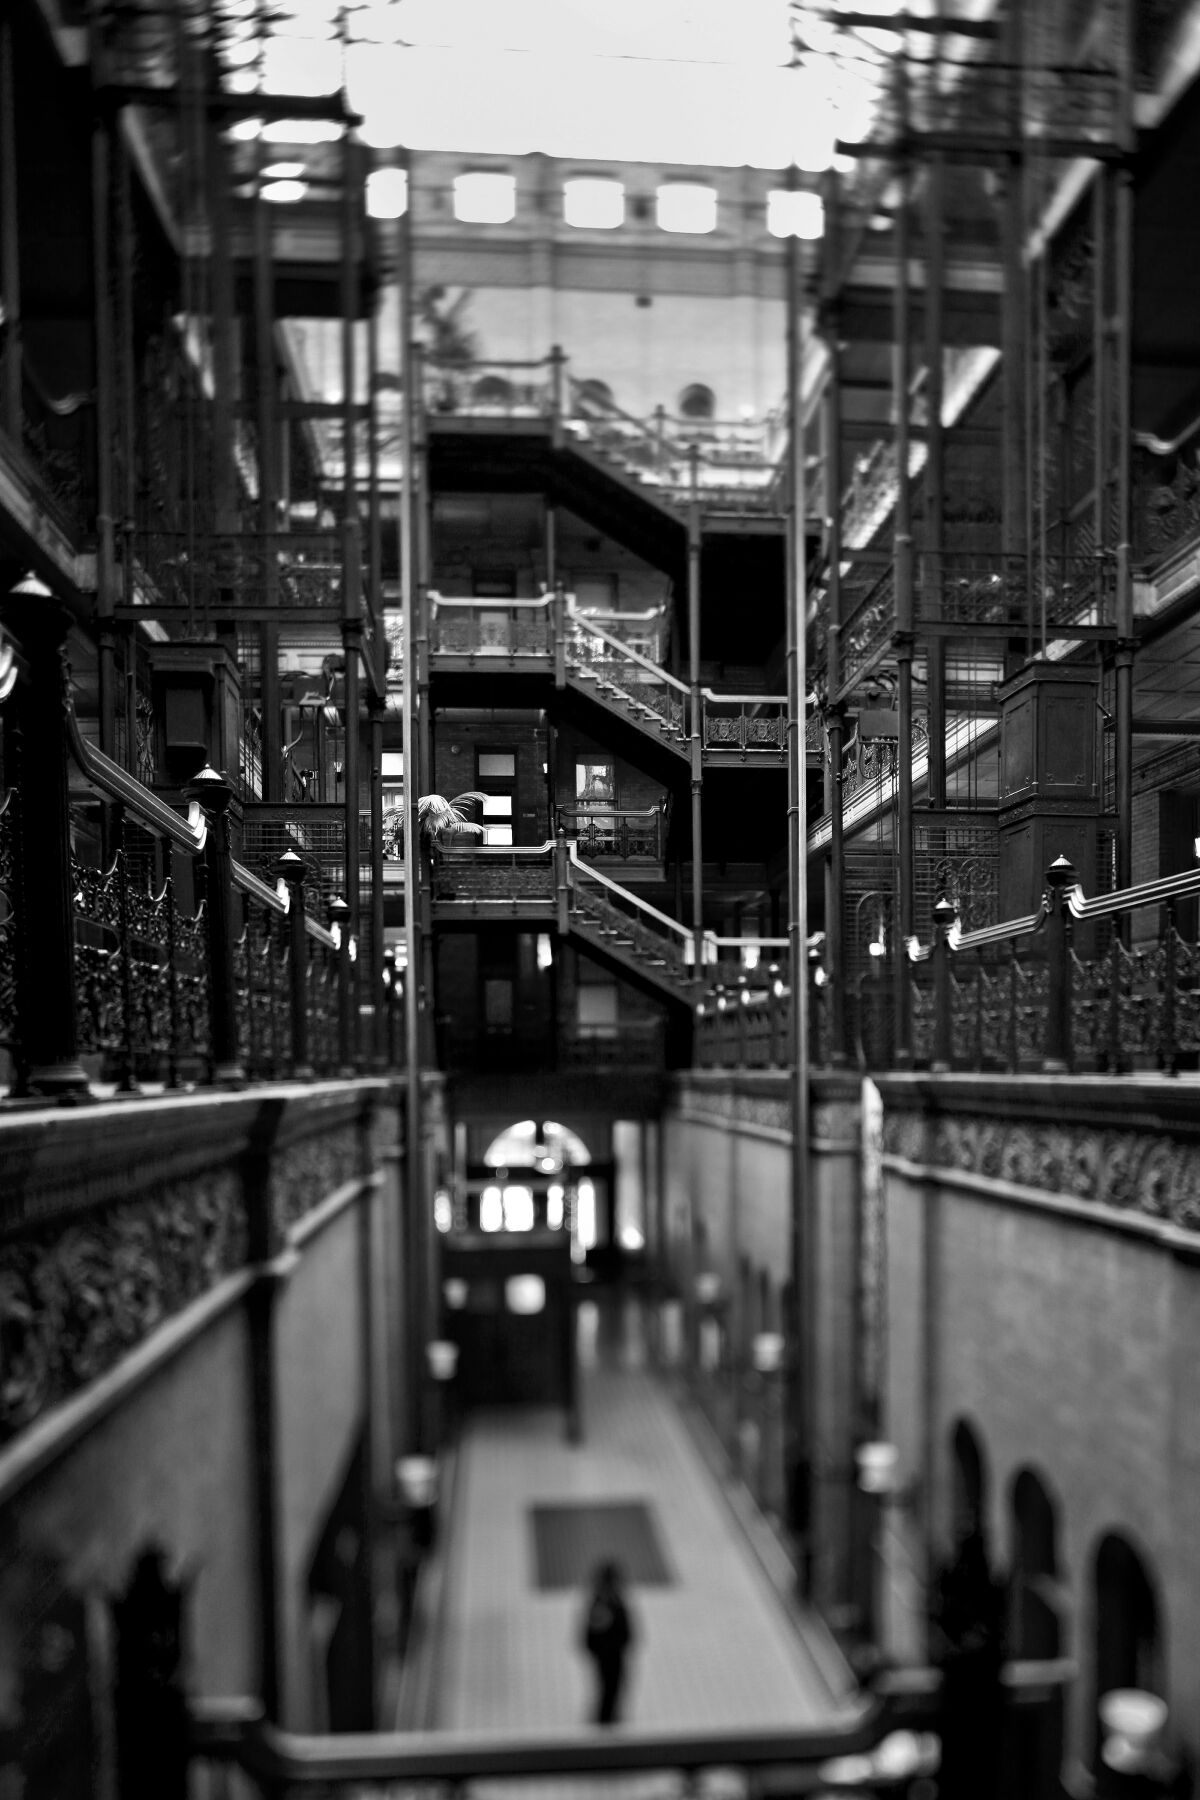 A view of the ironwork and open space inside the Bradbury Building in downtown Los Angeles